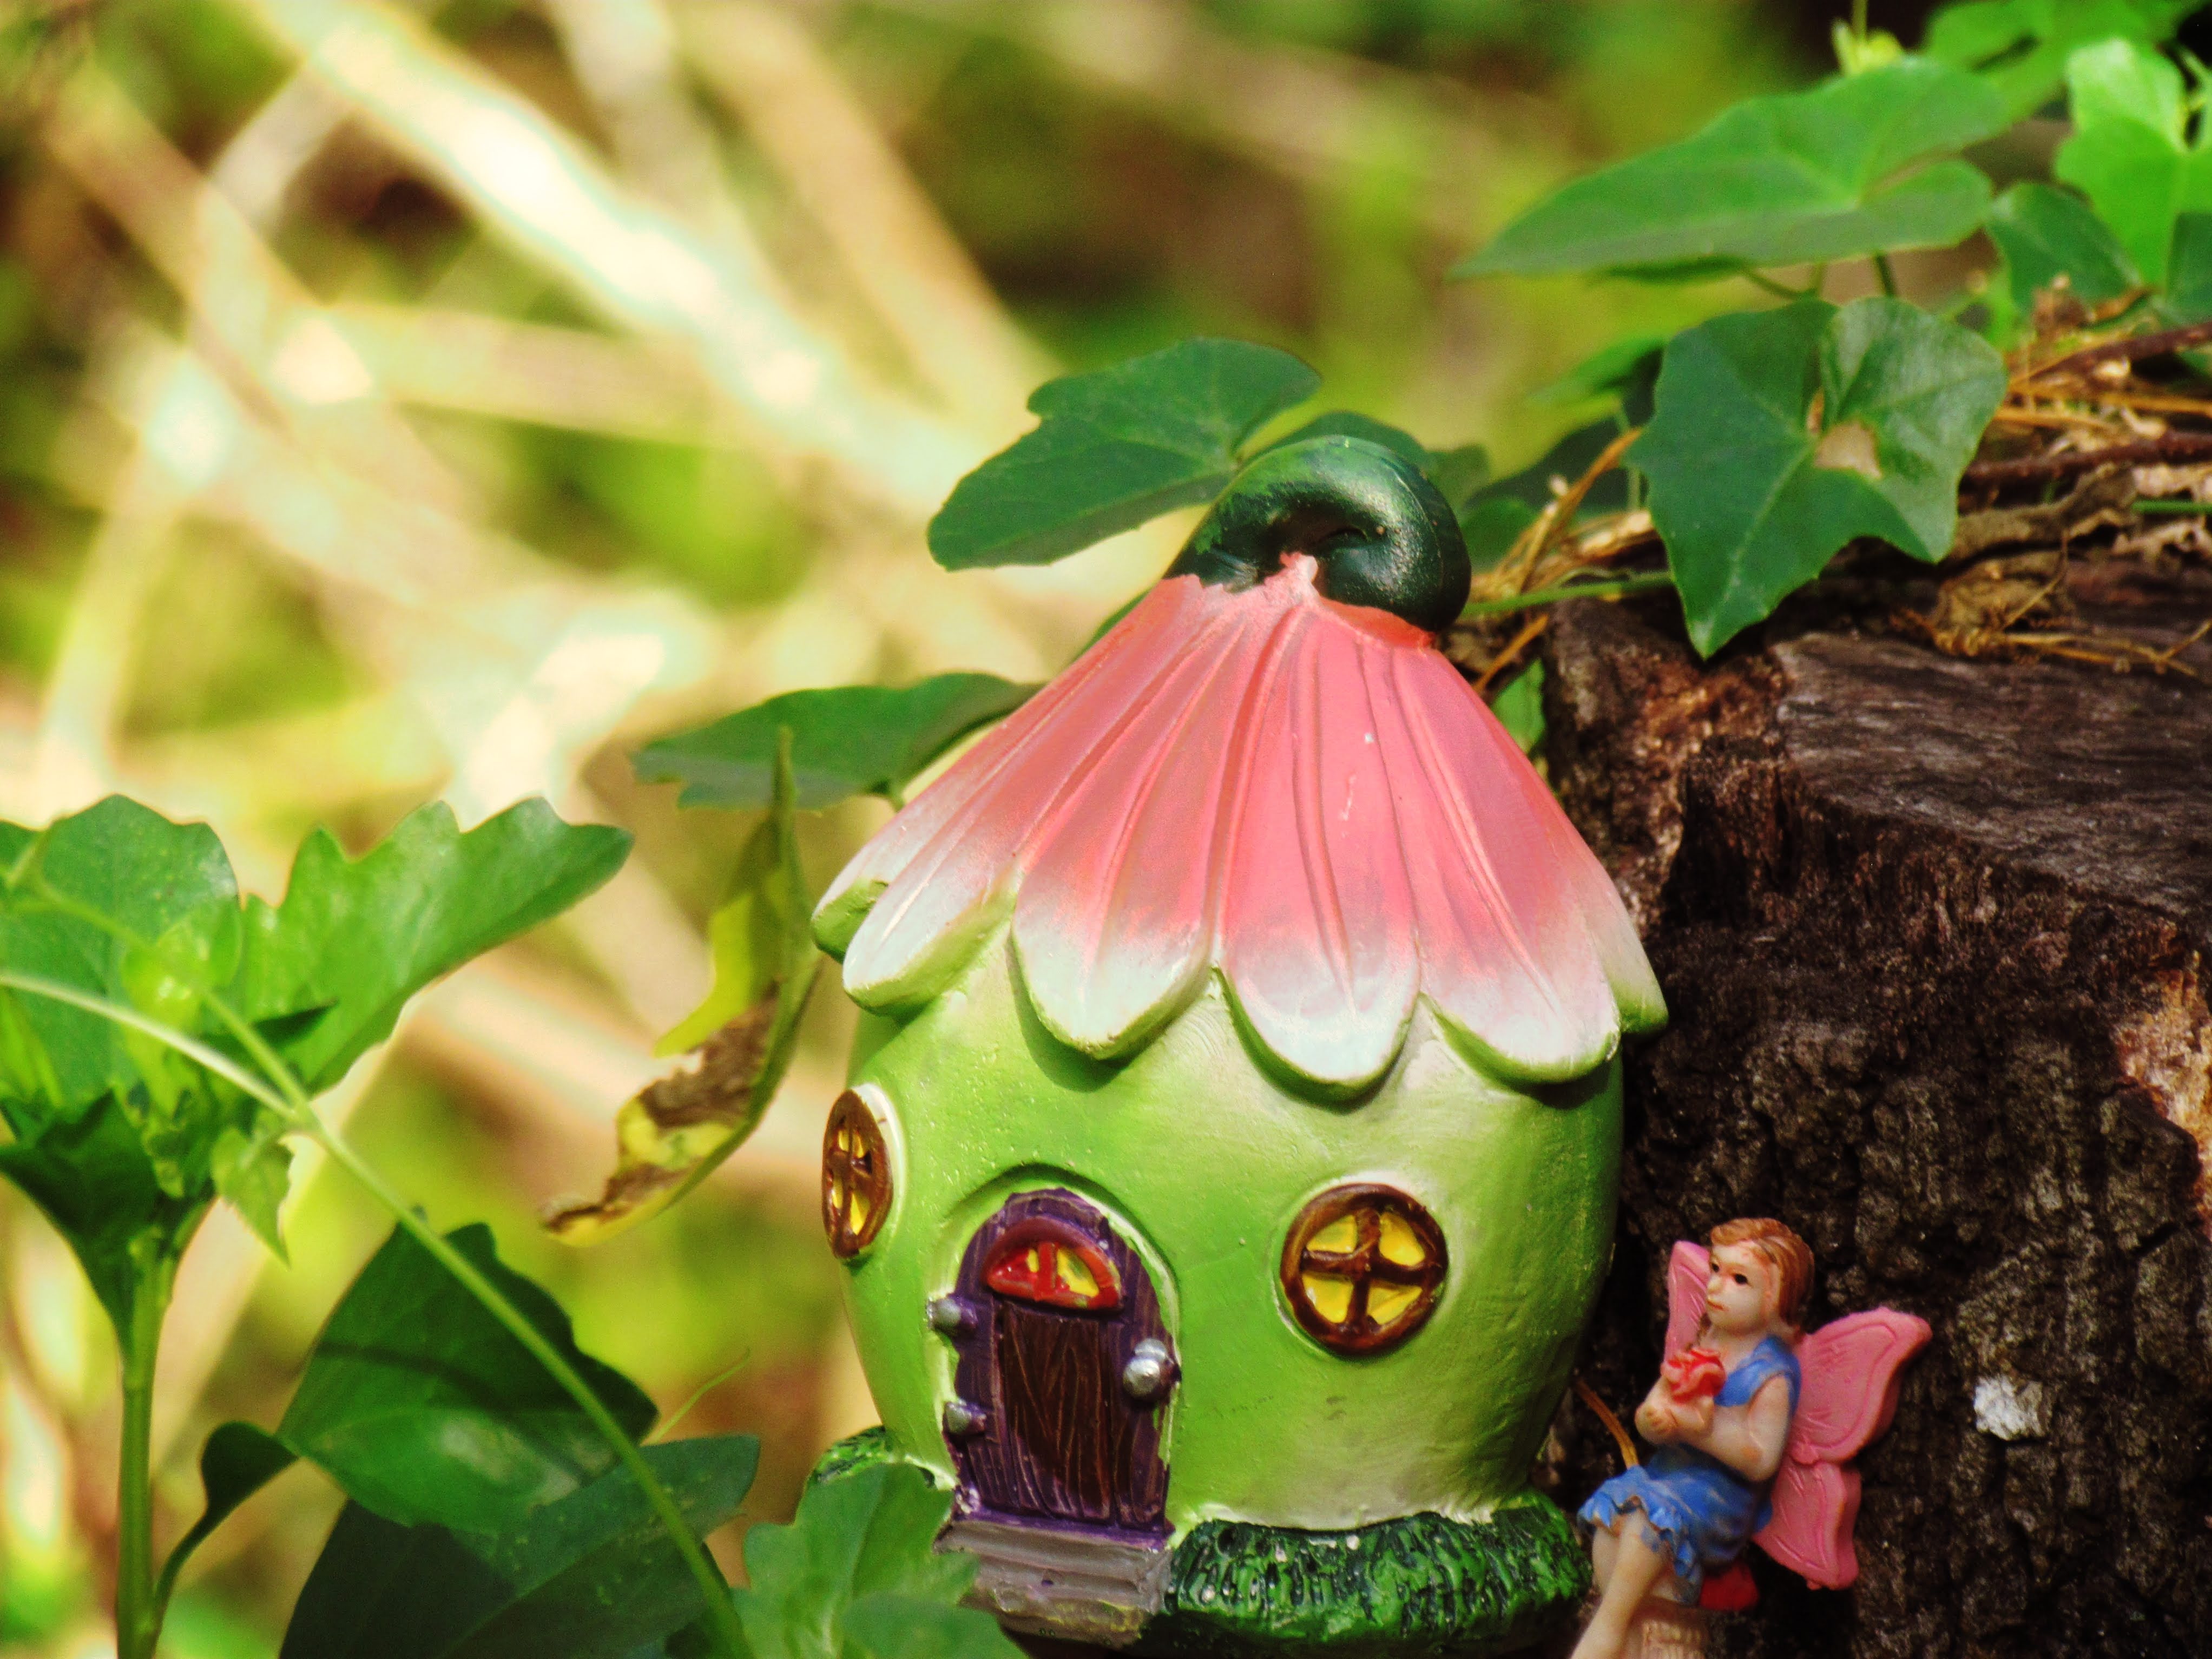 A fairy and quaint fairy cottage sitting on a mushroom in the forest with green and pink energies